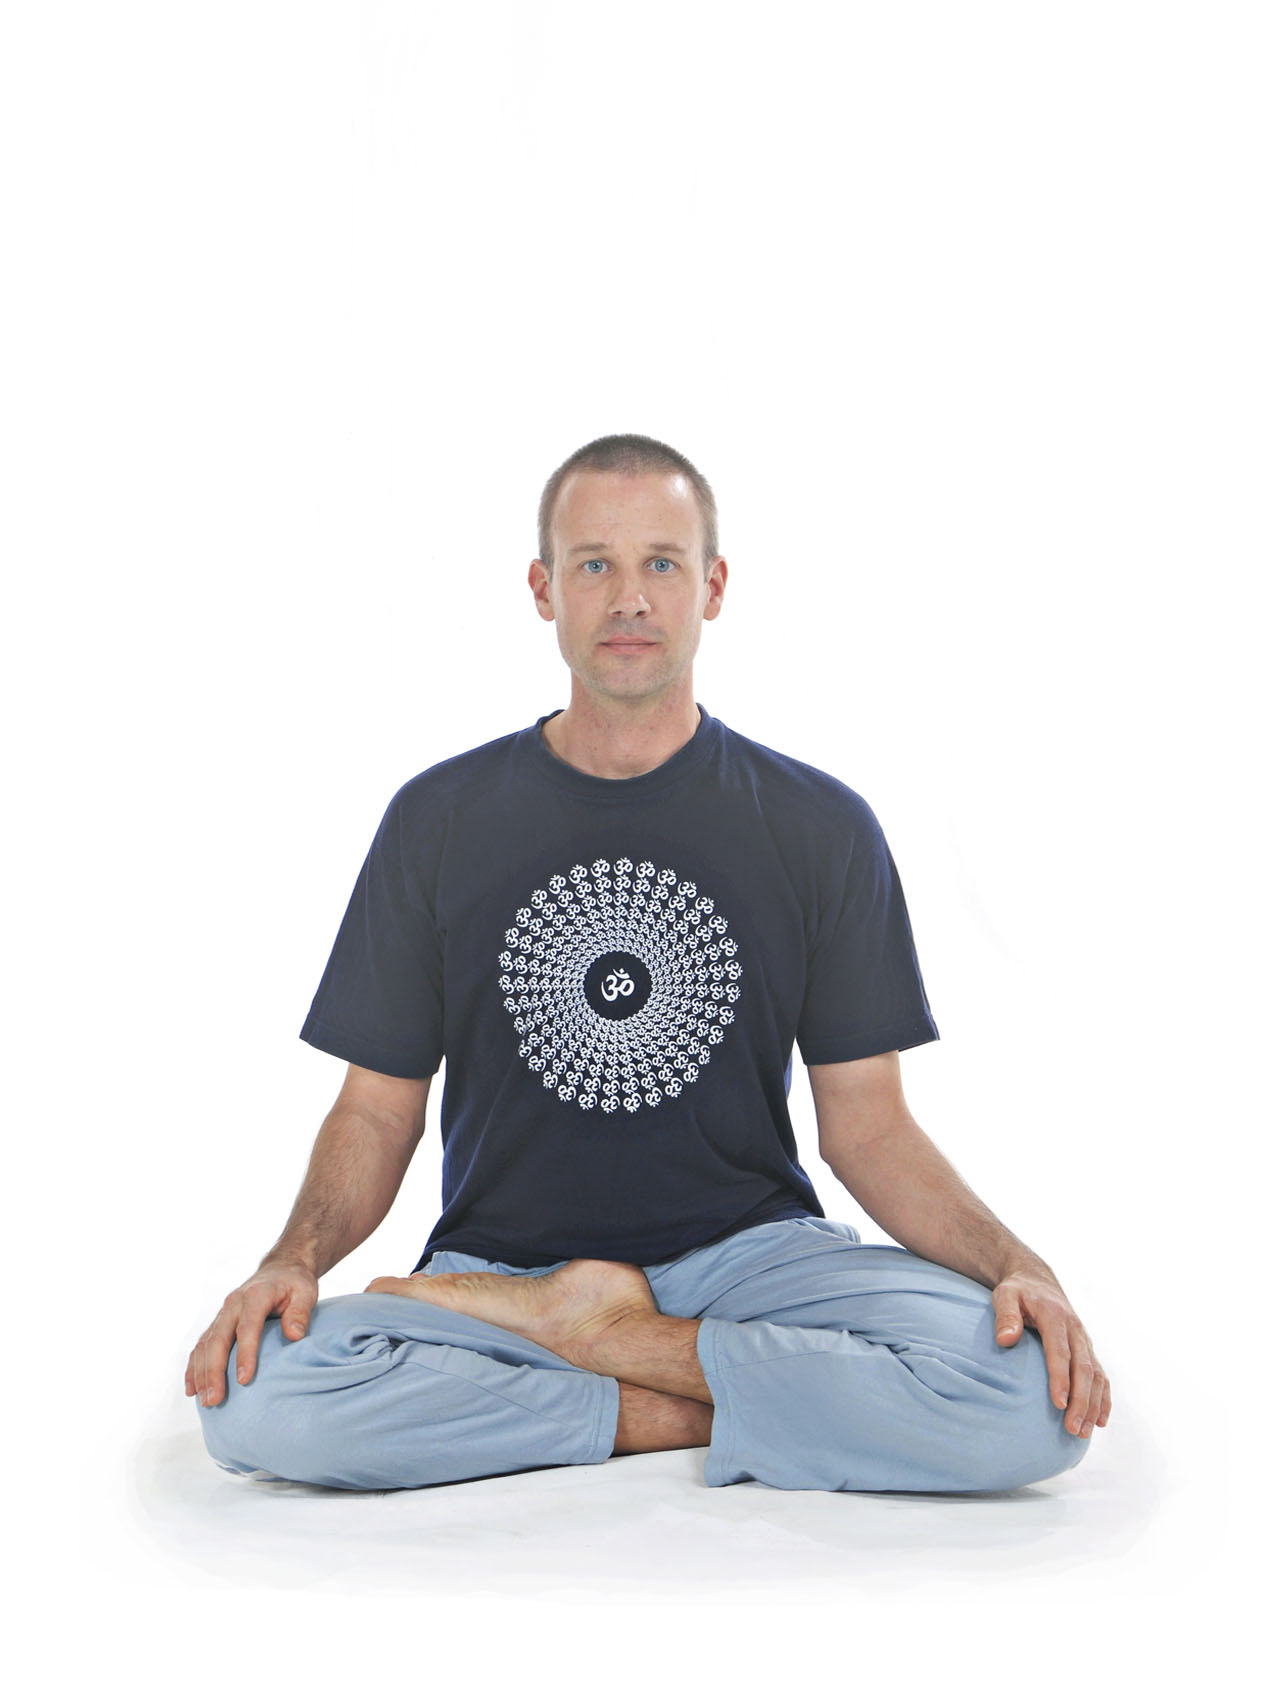 Lotus Pose Sequence: Safely Prepare for Padmasana | YouAligned